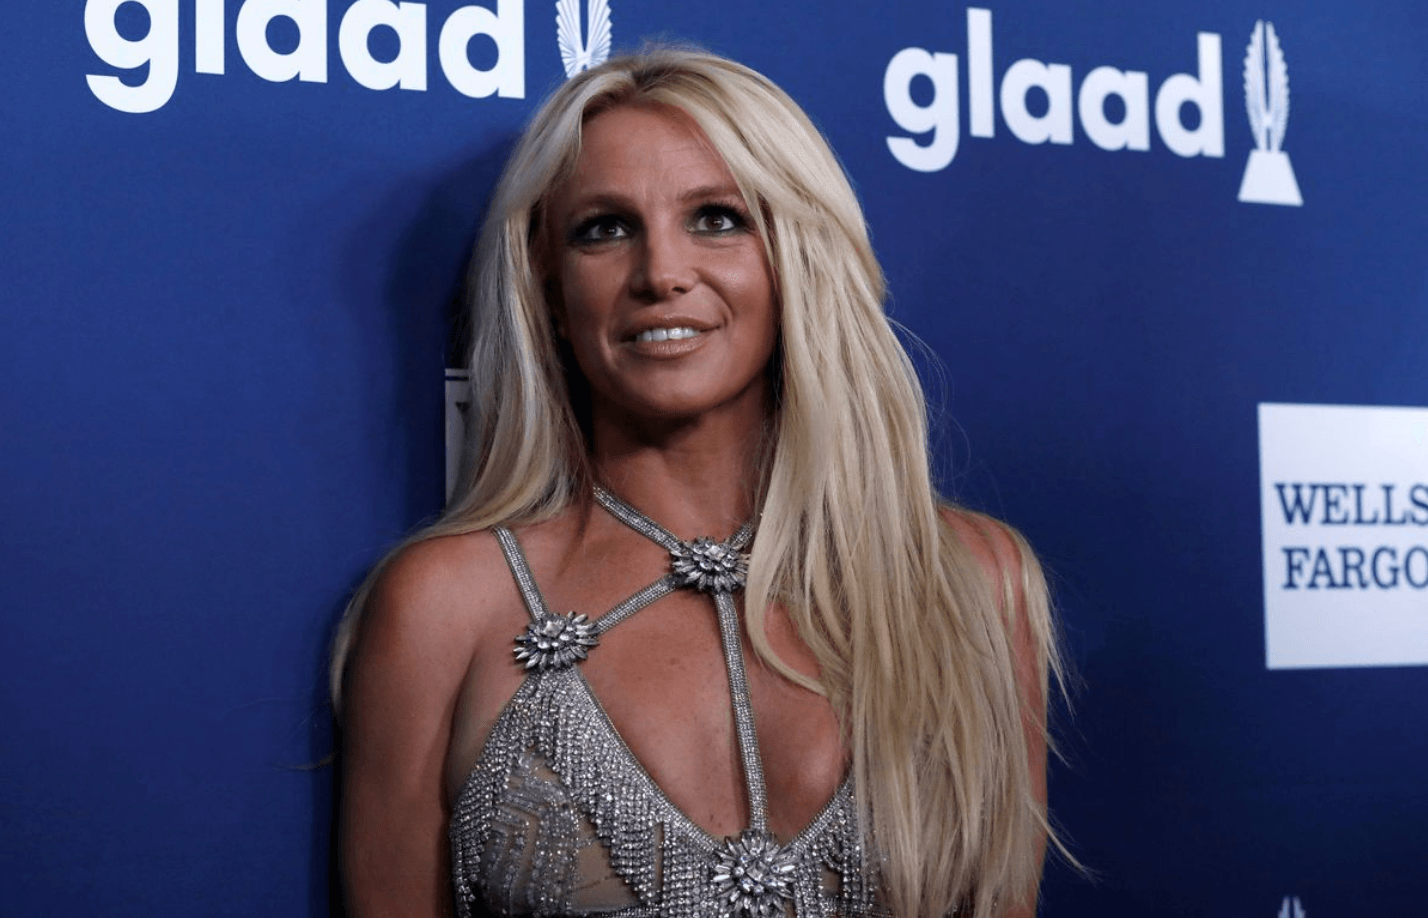 Britney Spears’ father reportedly asks court to end her conservatorship